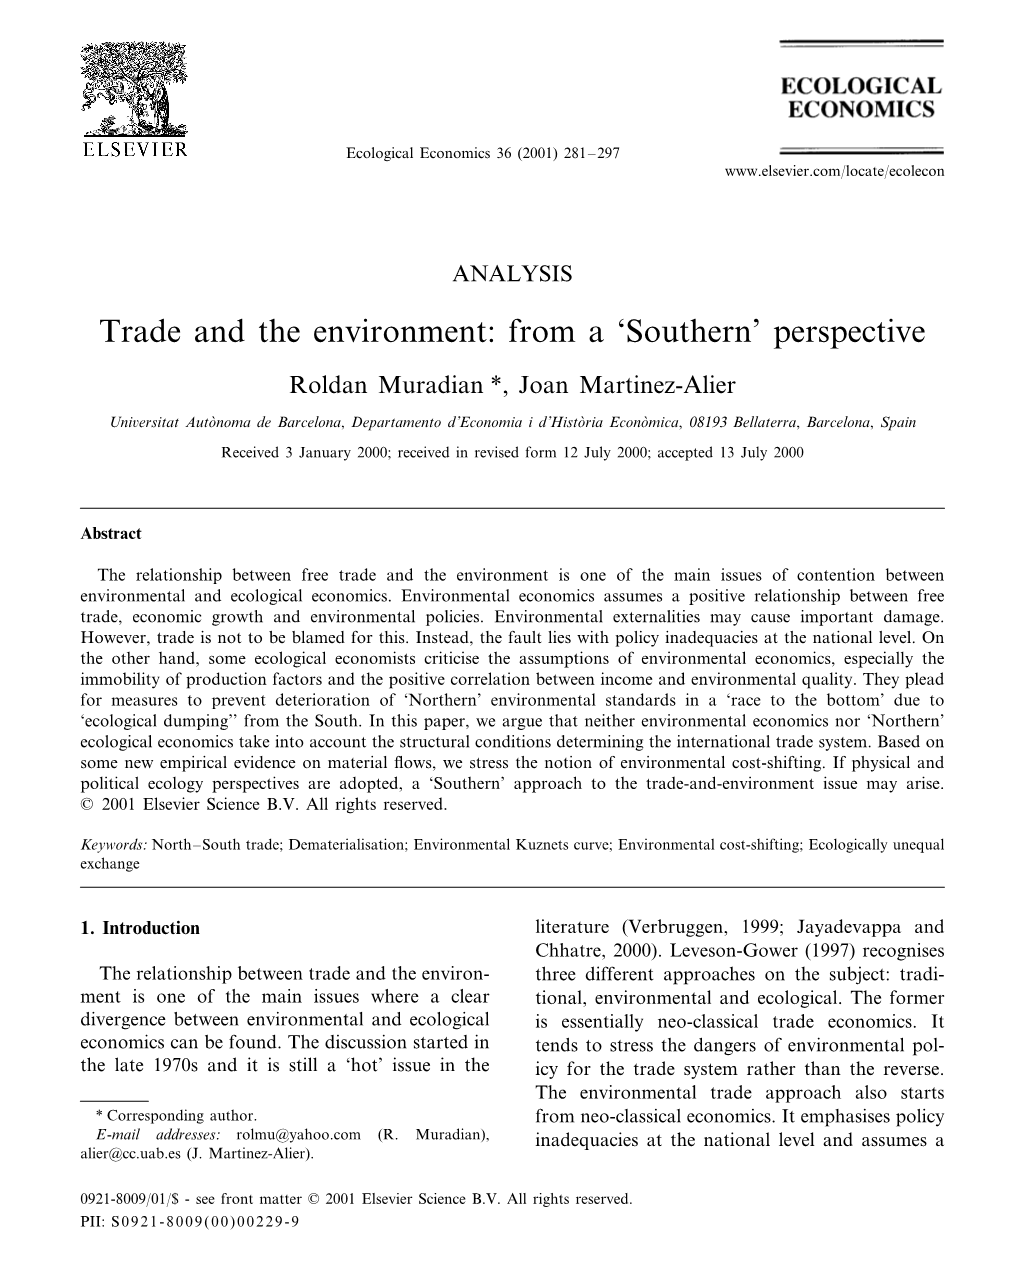 Trade and the Environment: from a 'Southern' Perspective